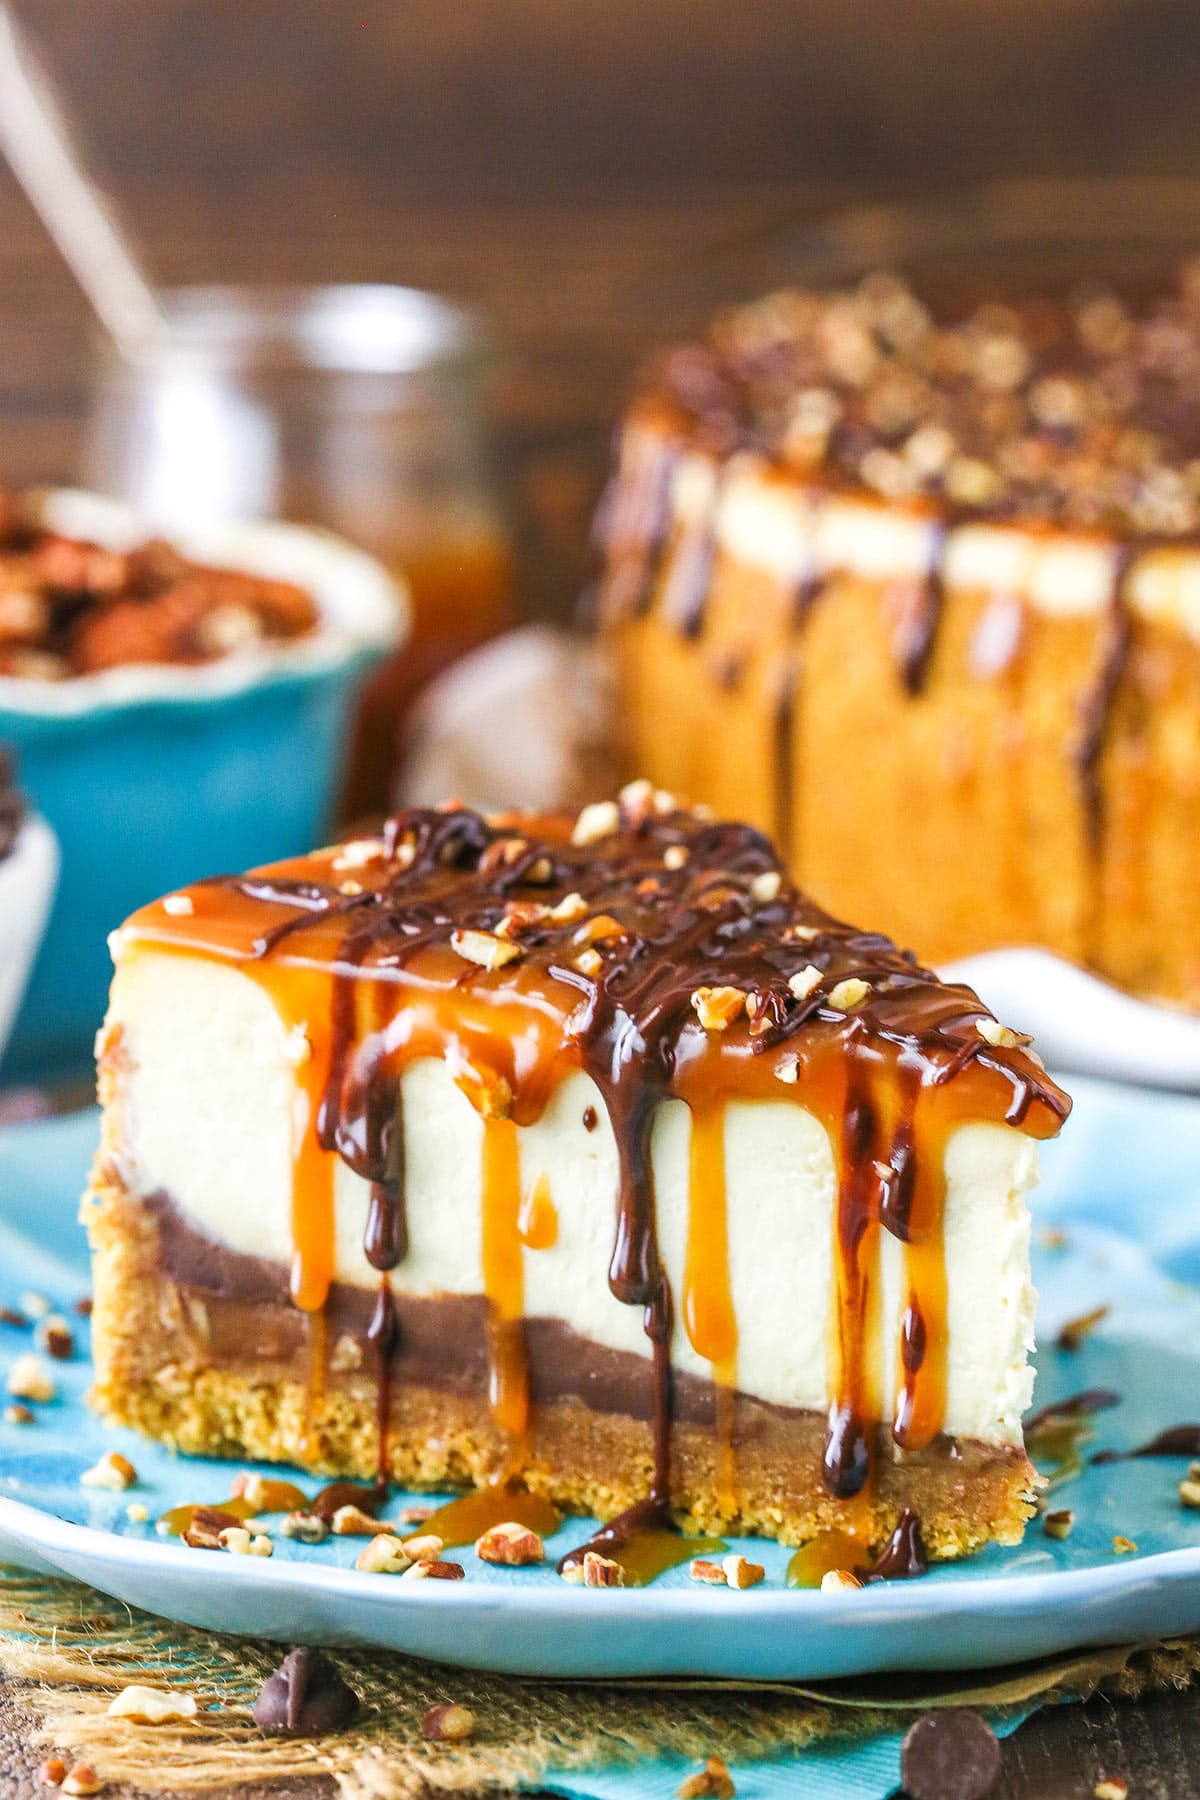 Side view of a slice of Turtle Cheesecake on a blue plate